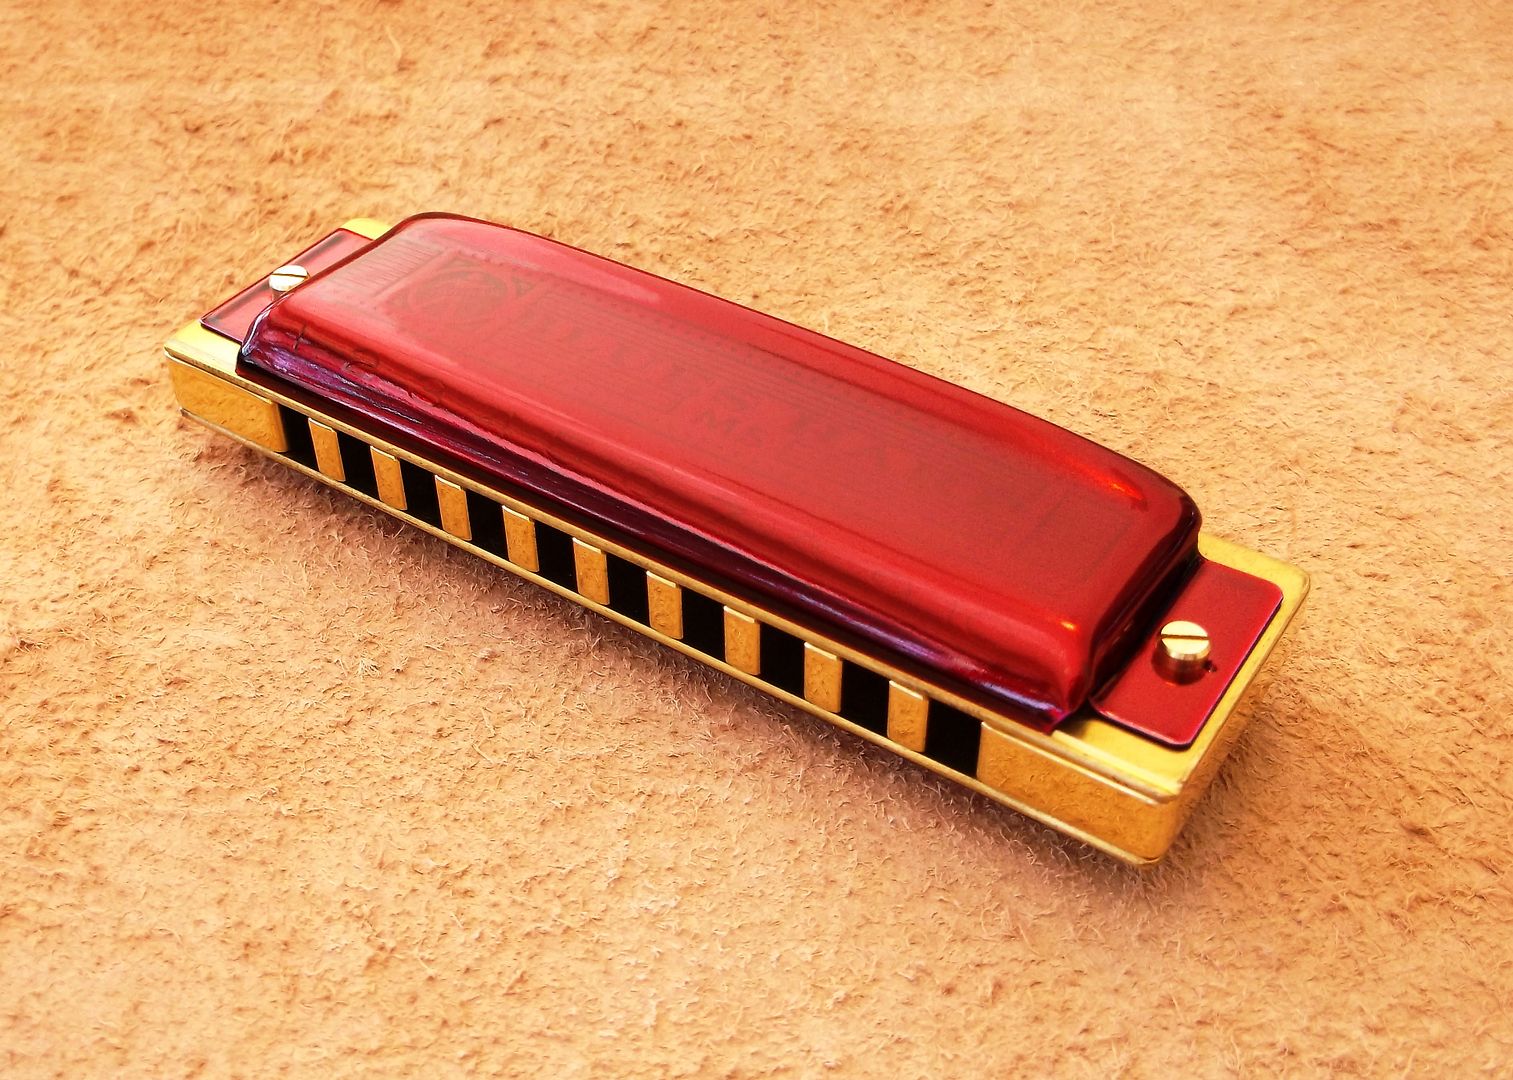 MS Harp - Cross Harp Low F Reed Plates, Solid Brass Comb, Candy Red Blues Harp Covers photo CHBrassRed4_zps9997eeb7.jpg